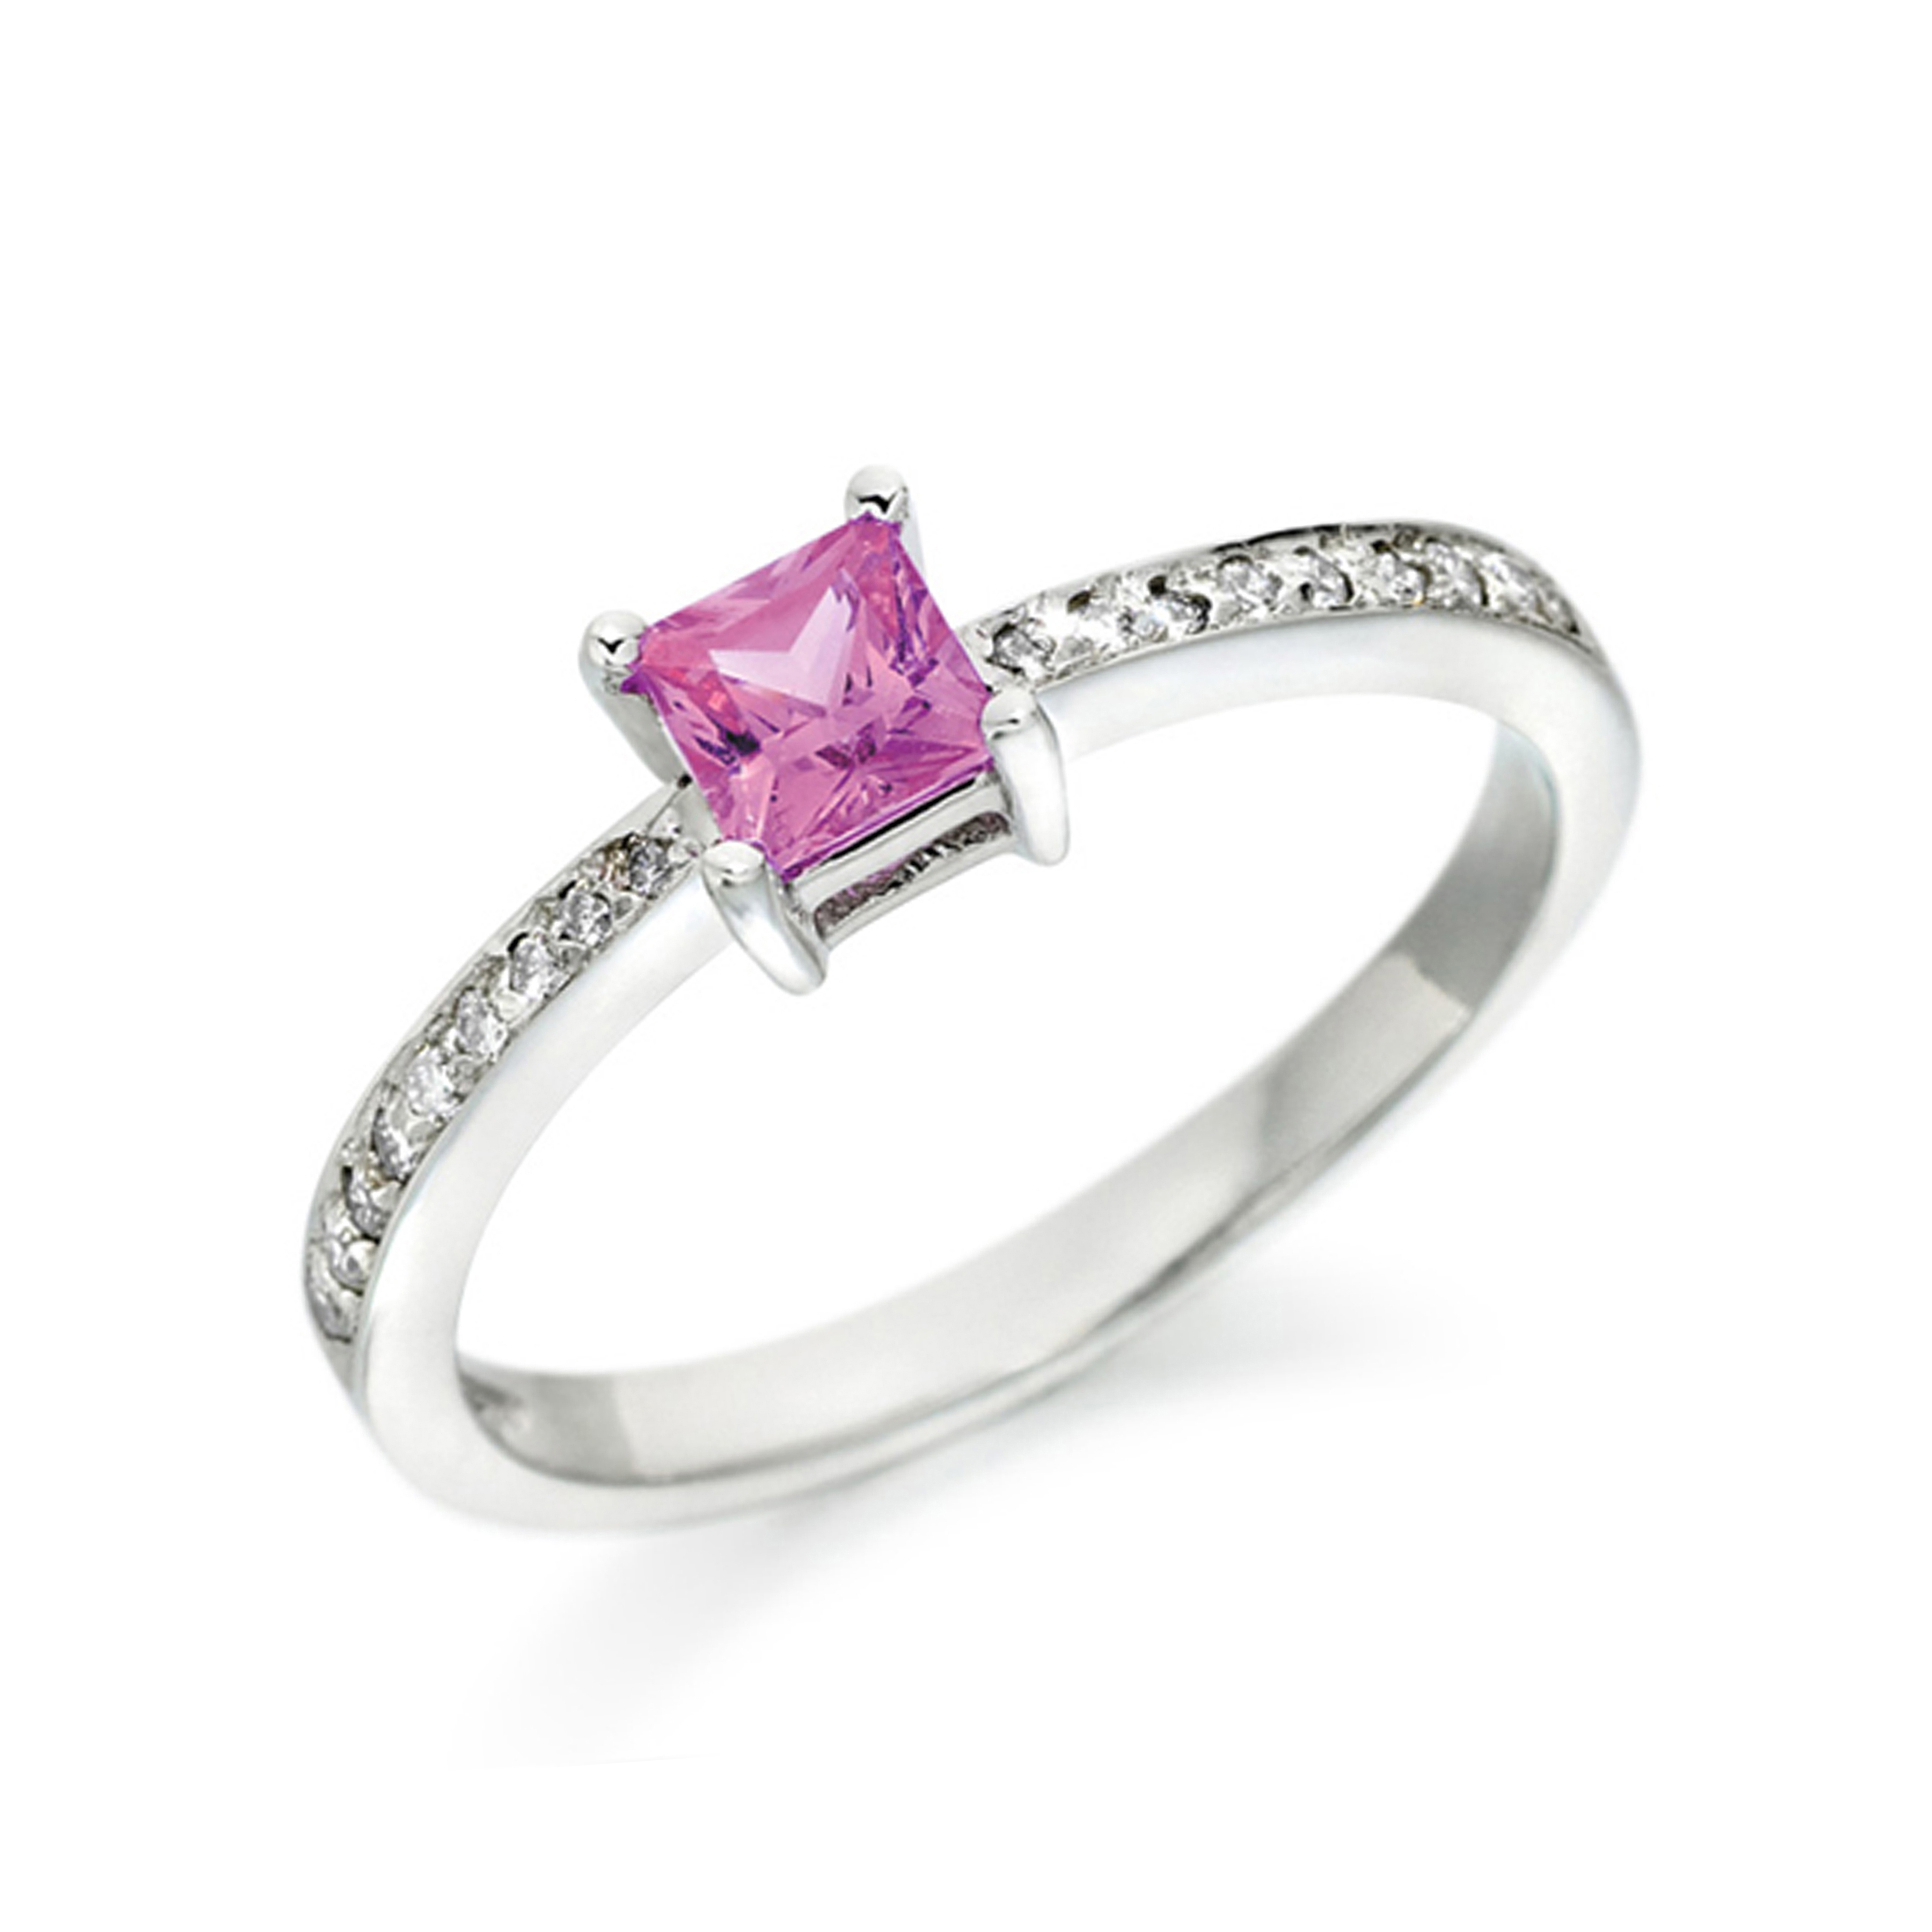 5X5mm Princess Pink Sapphire Stones On Shoulder Diamond And Gemstone Engagement Ring